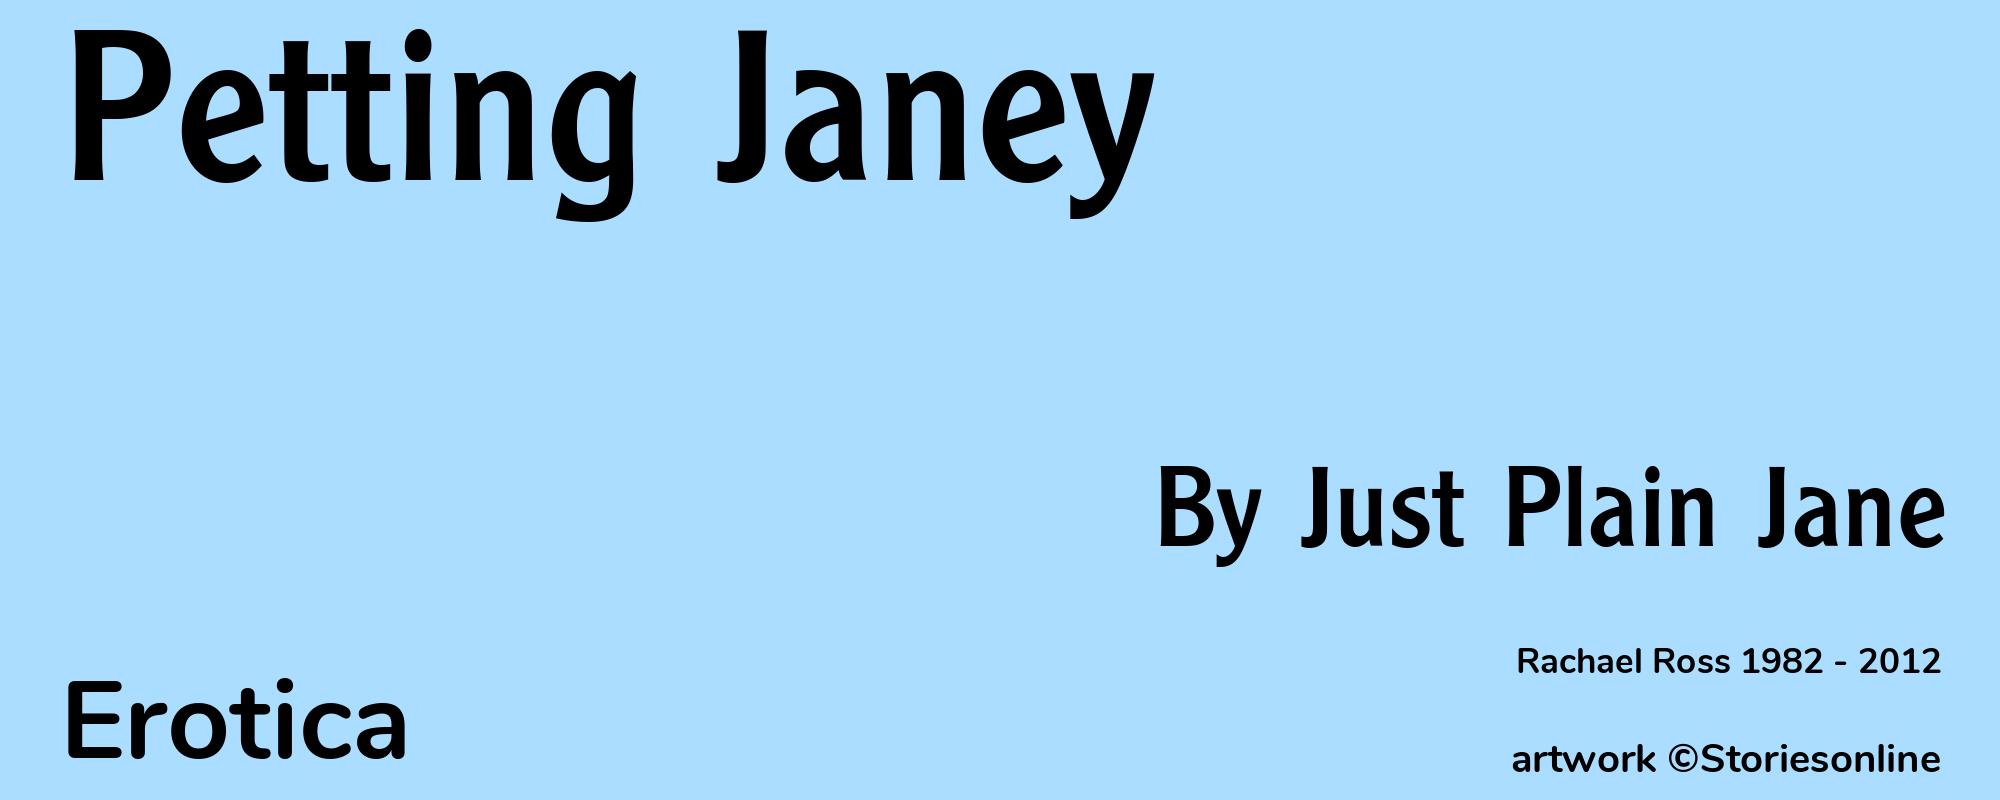 Petting Janey - Cover